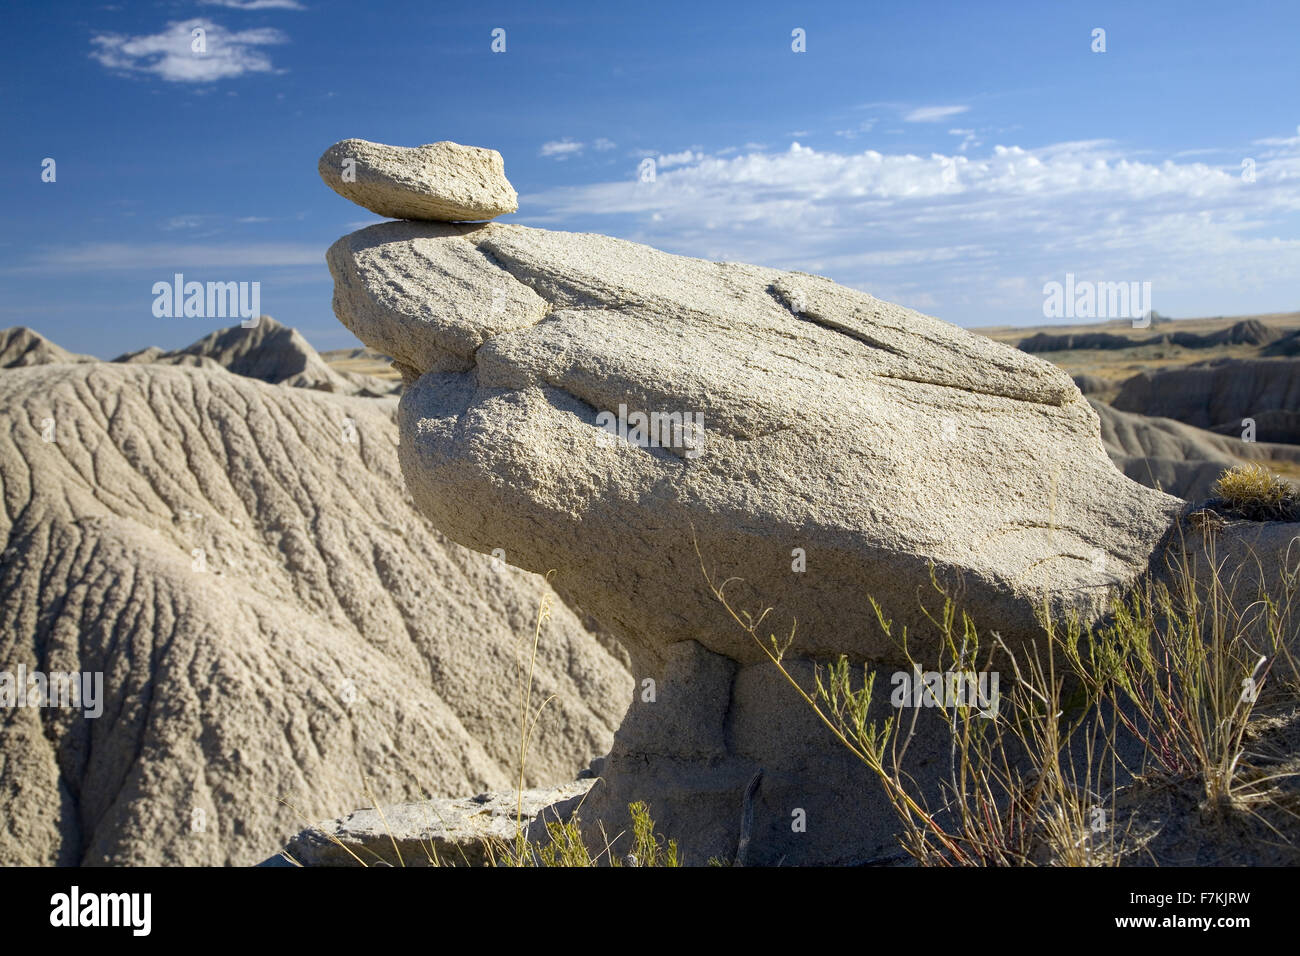 Rock formations in Toadstool Geologic Park, a region of badlands formed on the flank of the Pine Ridge Escarpment near Crawford, NE, the far Northwest of state Stock Photo